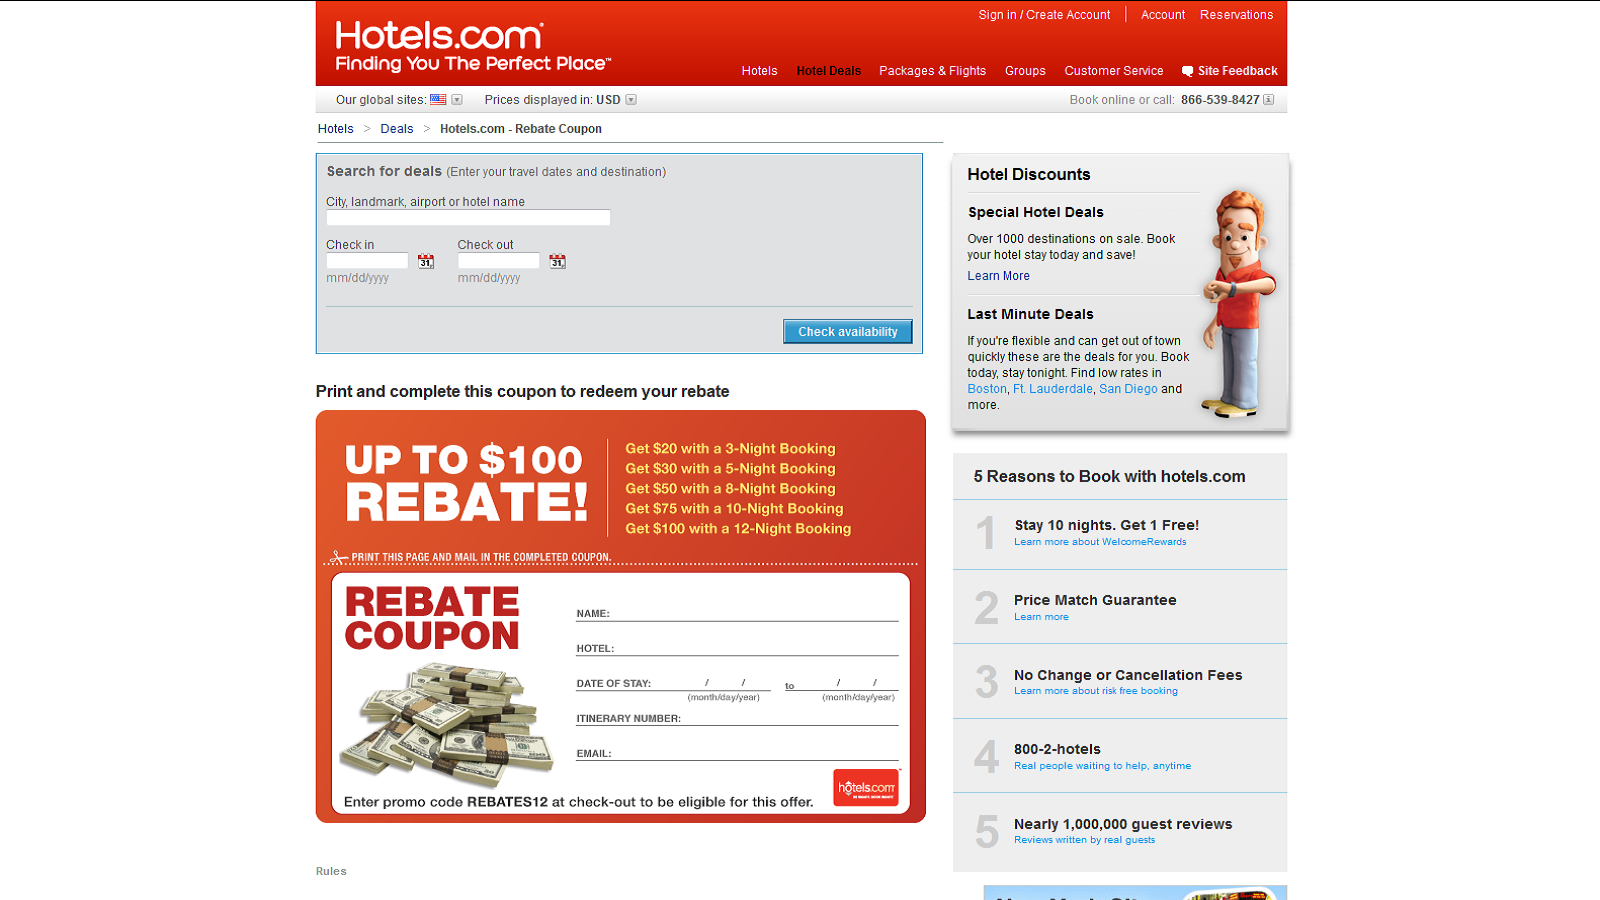 Save Between $20 and $100 On All Hotel Bookings Now!